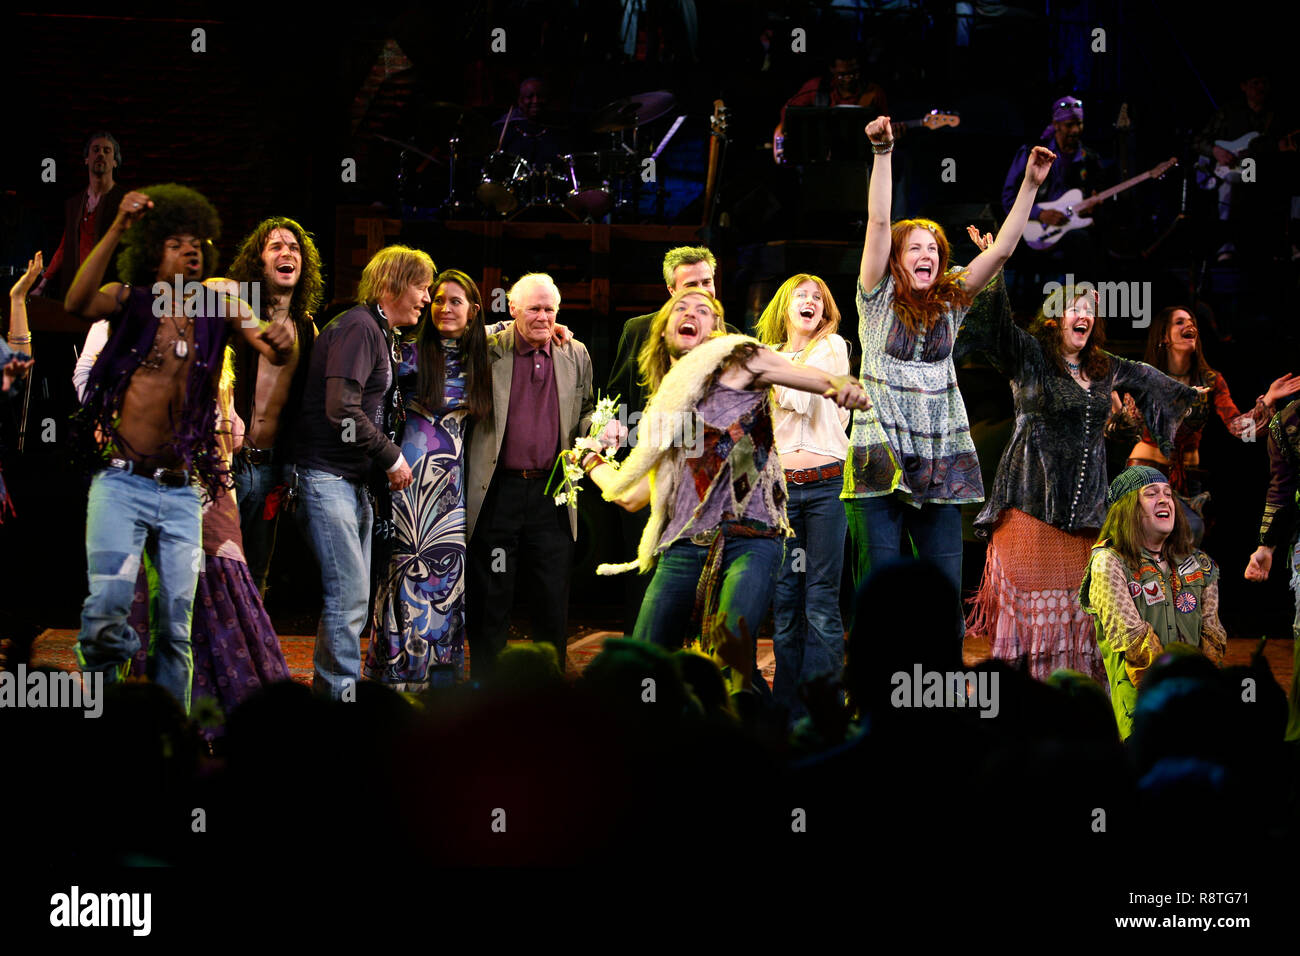 ***FILE PHOTO*** Hair Composer Galt MacDermot Has Passed Away featured cast members Megan Lawrence, Darius Nichols, Kacie Sheik, Sasha Allen, Gavin Creel, Will Swenson, Caissie Levy & Bryce Ryness with James Rado, Diane Paulus & Galt MacDermot during the Opening Night Performance Curtain Call for HAIR: THE AMERICAN TRIBAL LOVE-ROCK MUSICAL at the Al Hirschfeld Theatre in New York City. March 31, 2009 Credit: Walter McBride/MediaPunch Stock Photo